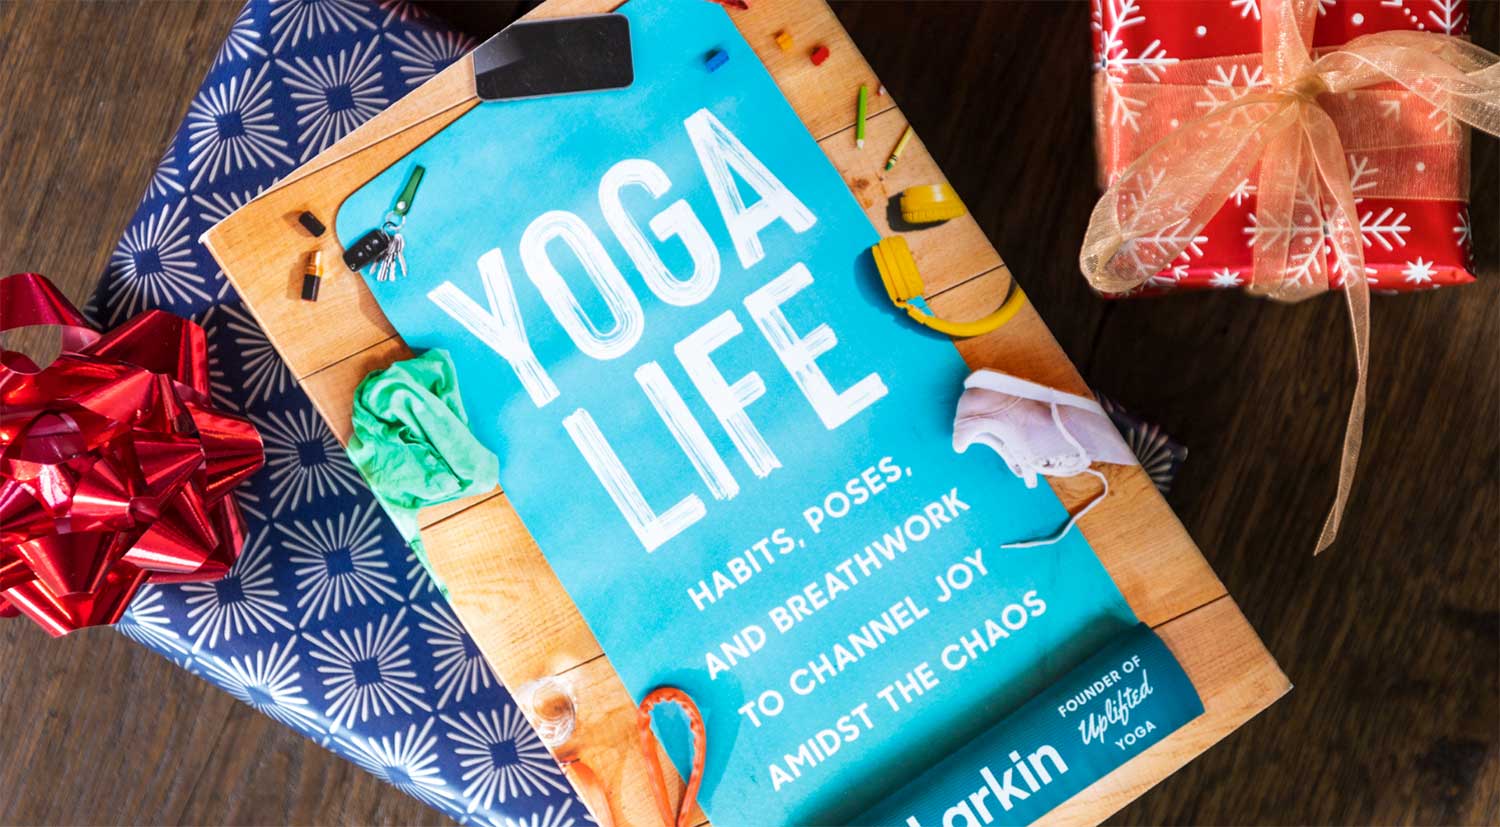 Brett Larkin's book, Yoga Life, surrounded by holiday themes gifts in Christmas wrapping paper.